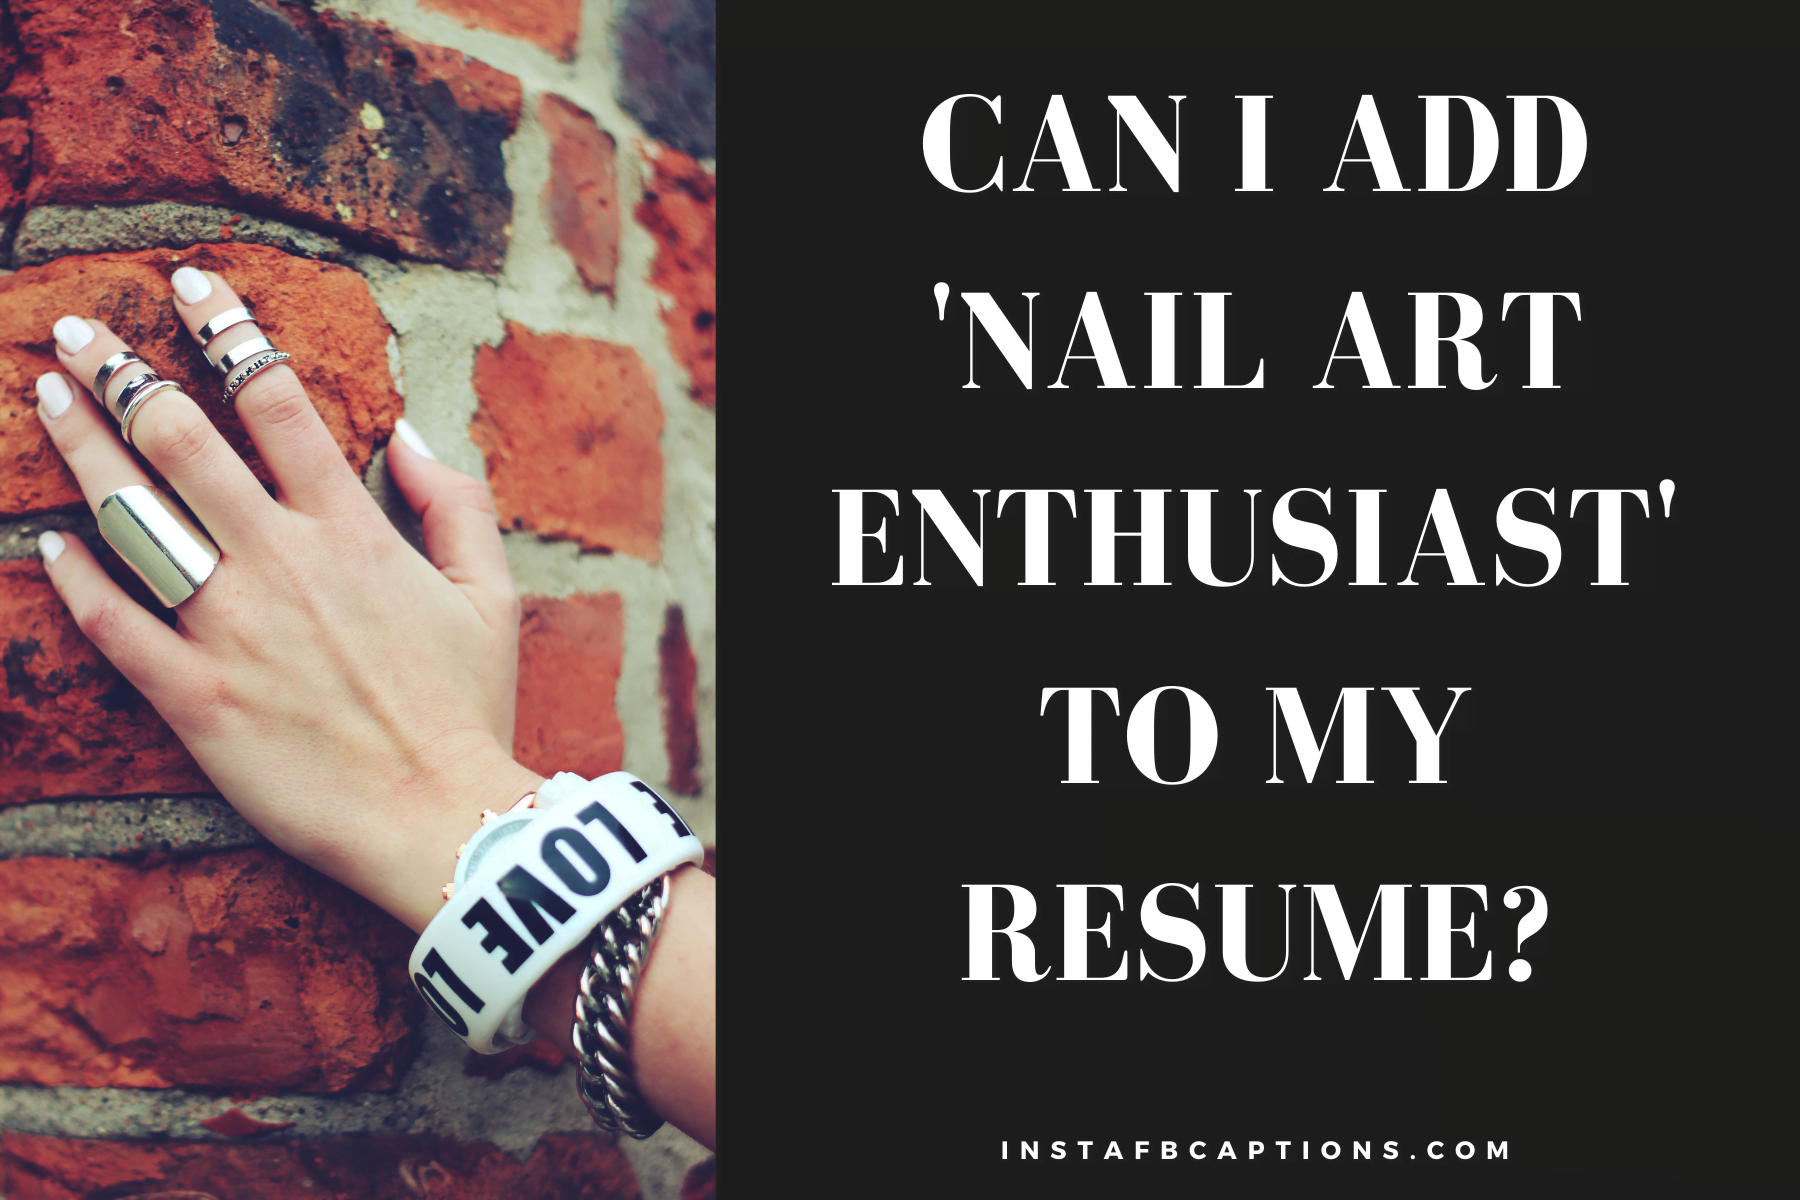 Classic Quotes On Nail Art To Use As Instagram Captions  - Classic Quotes on Nail Art to Use as Instagram Captions 1 - 92+ NAILS Instagram Captions for NailArt &#038; Manicure in 2023